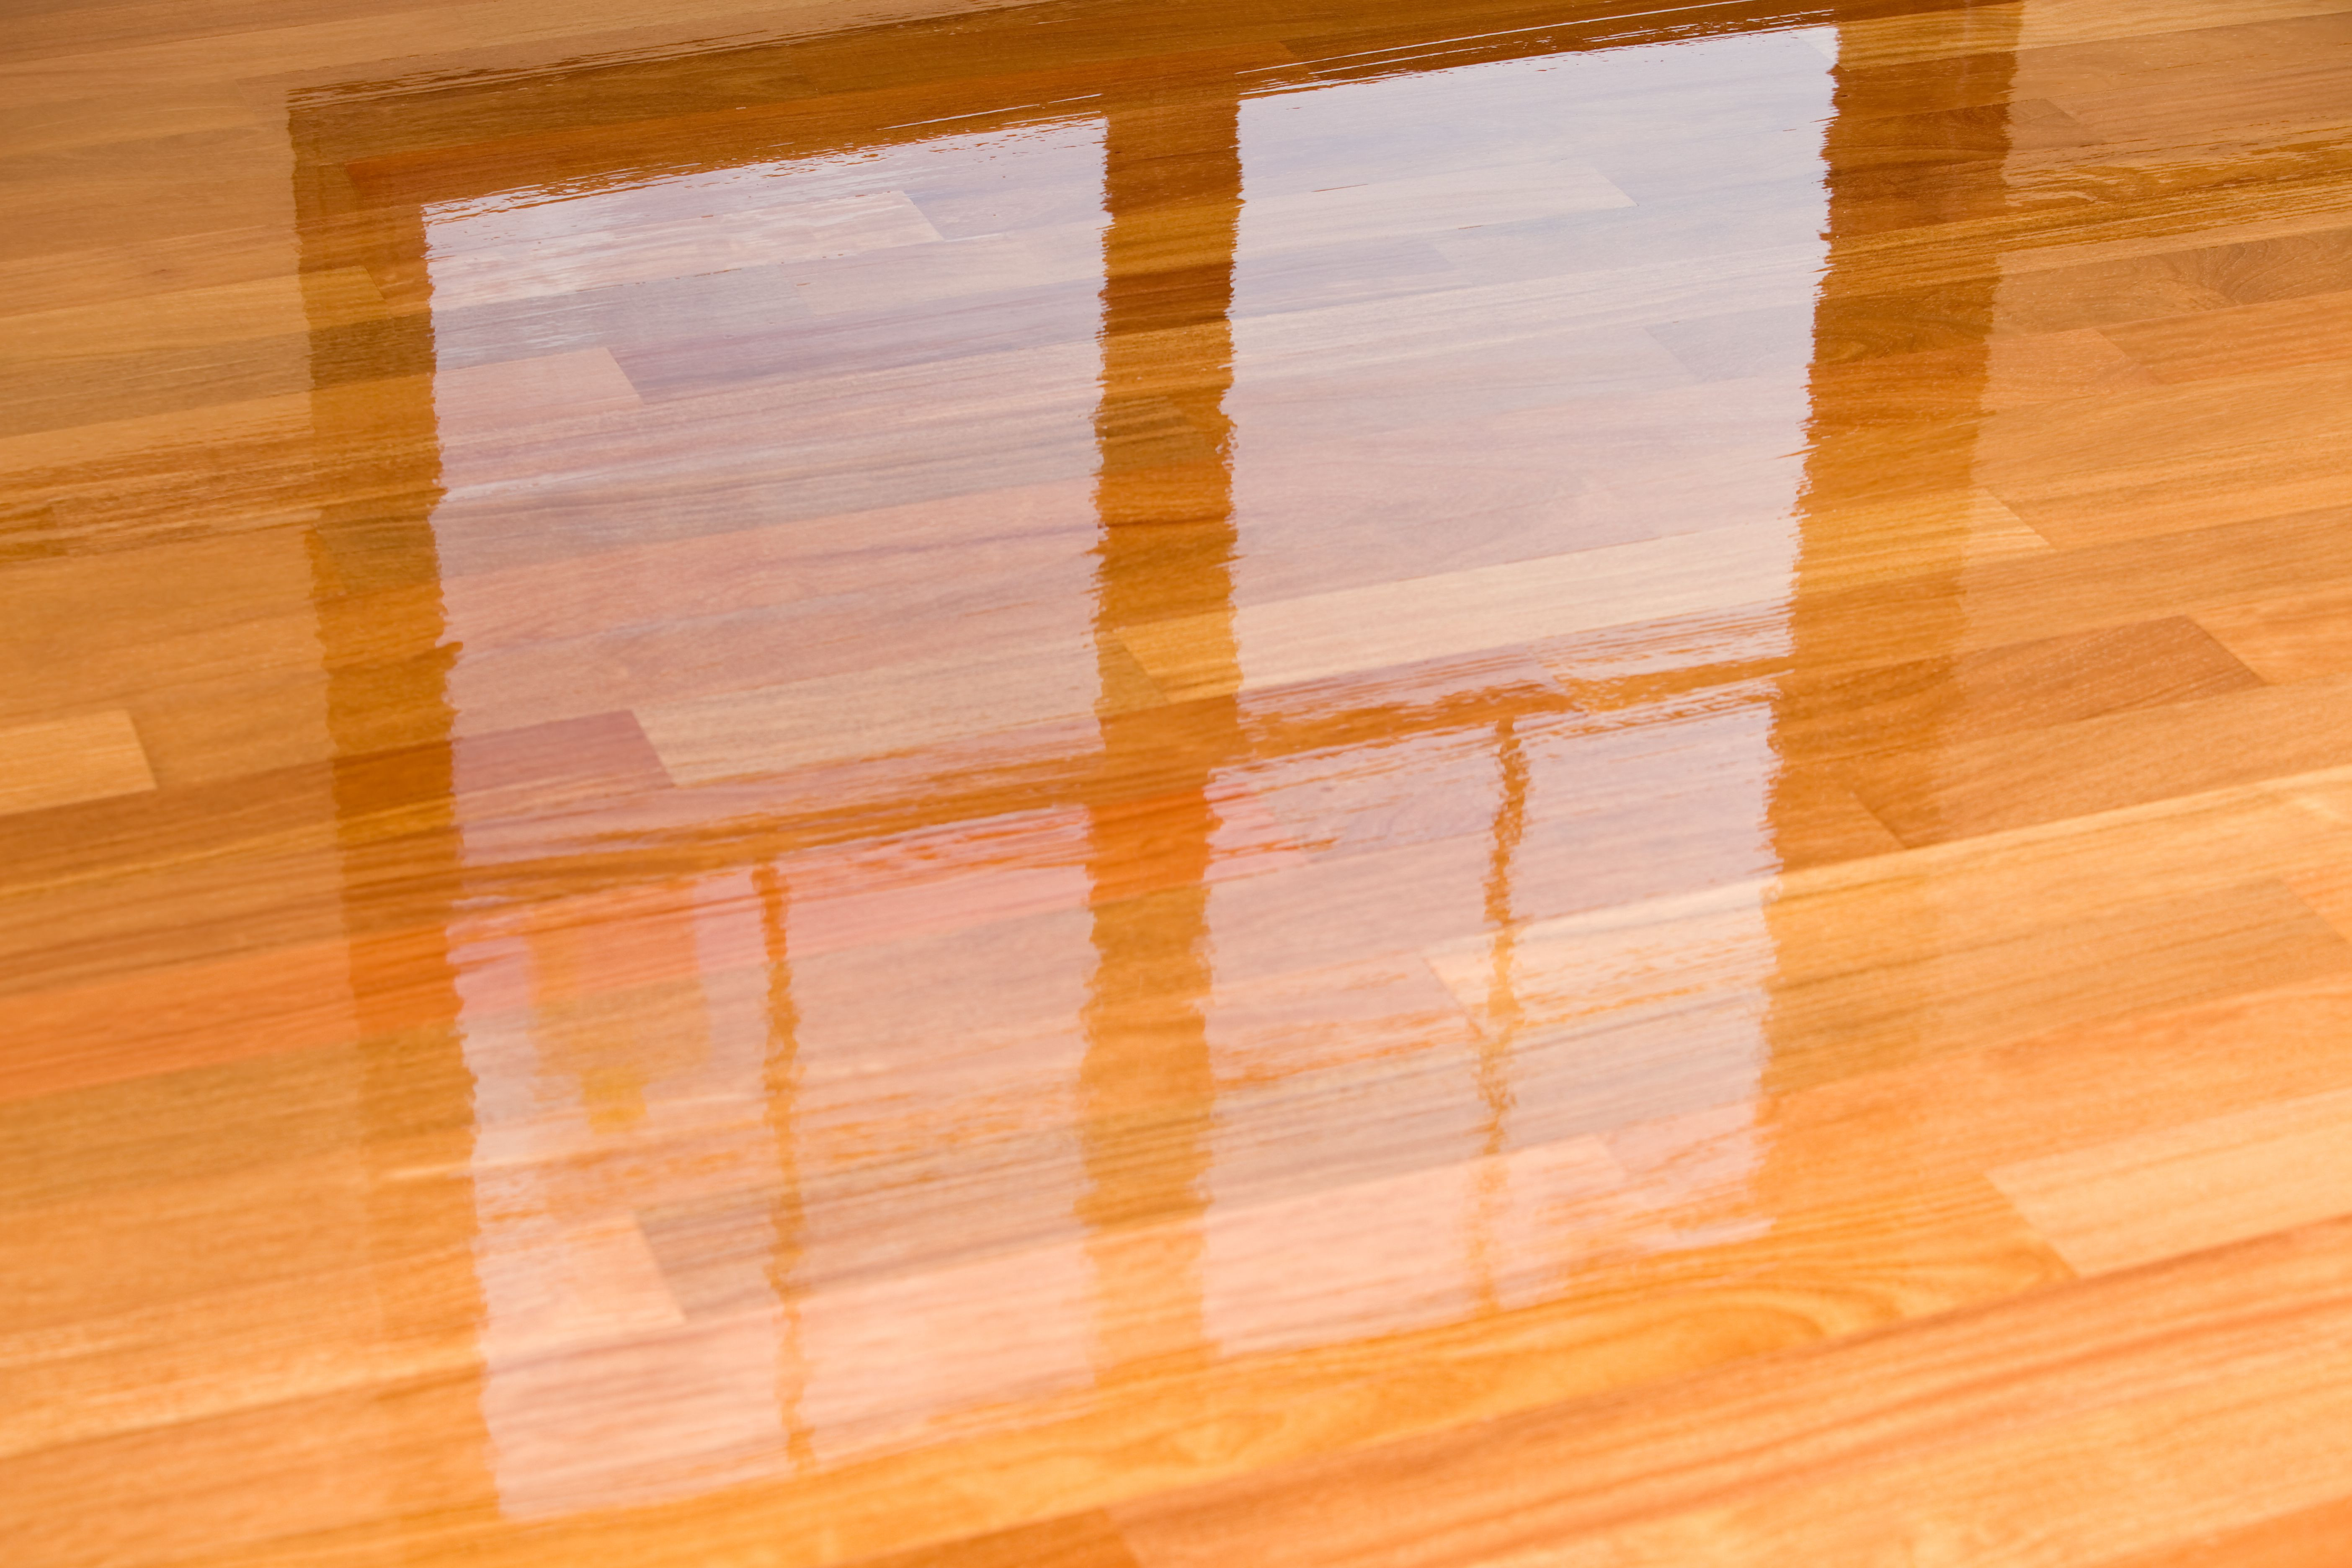 Hardwood Flooring Labor Rates Of Guide to Laminate Flooring Water and Damage Repair In Wet Polyurethane On New Hardwood Floor with Window Reflection 183846705 582e34da3df78c6f6a403968